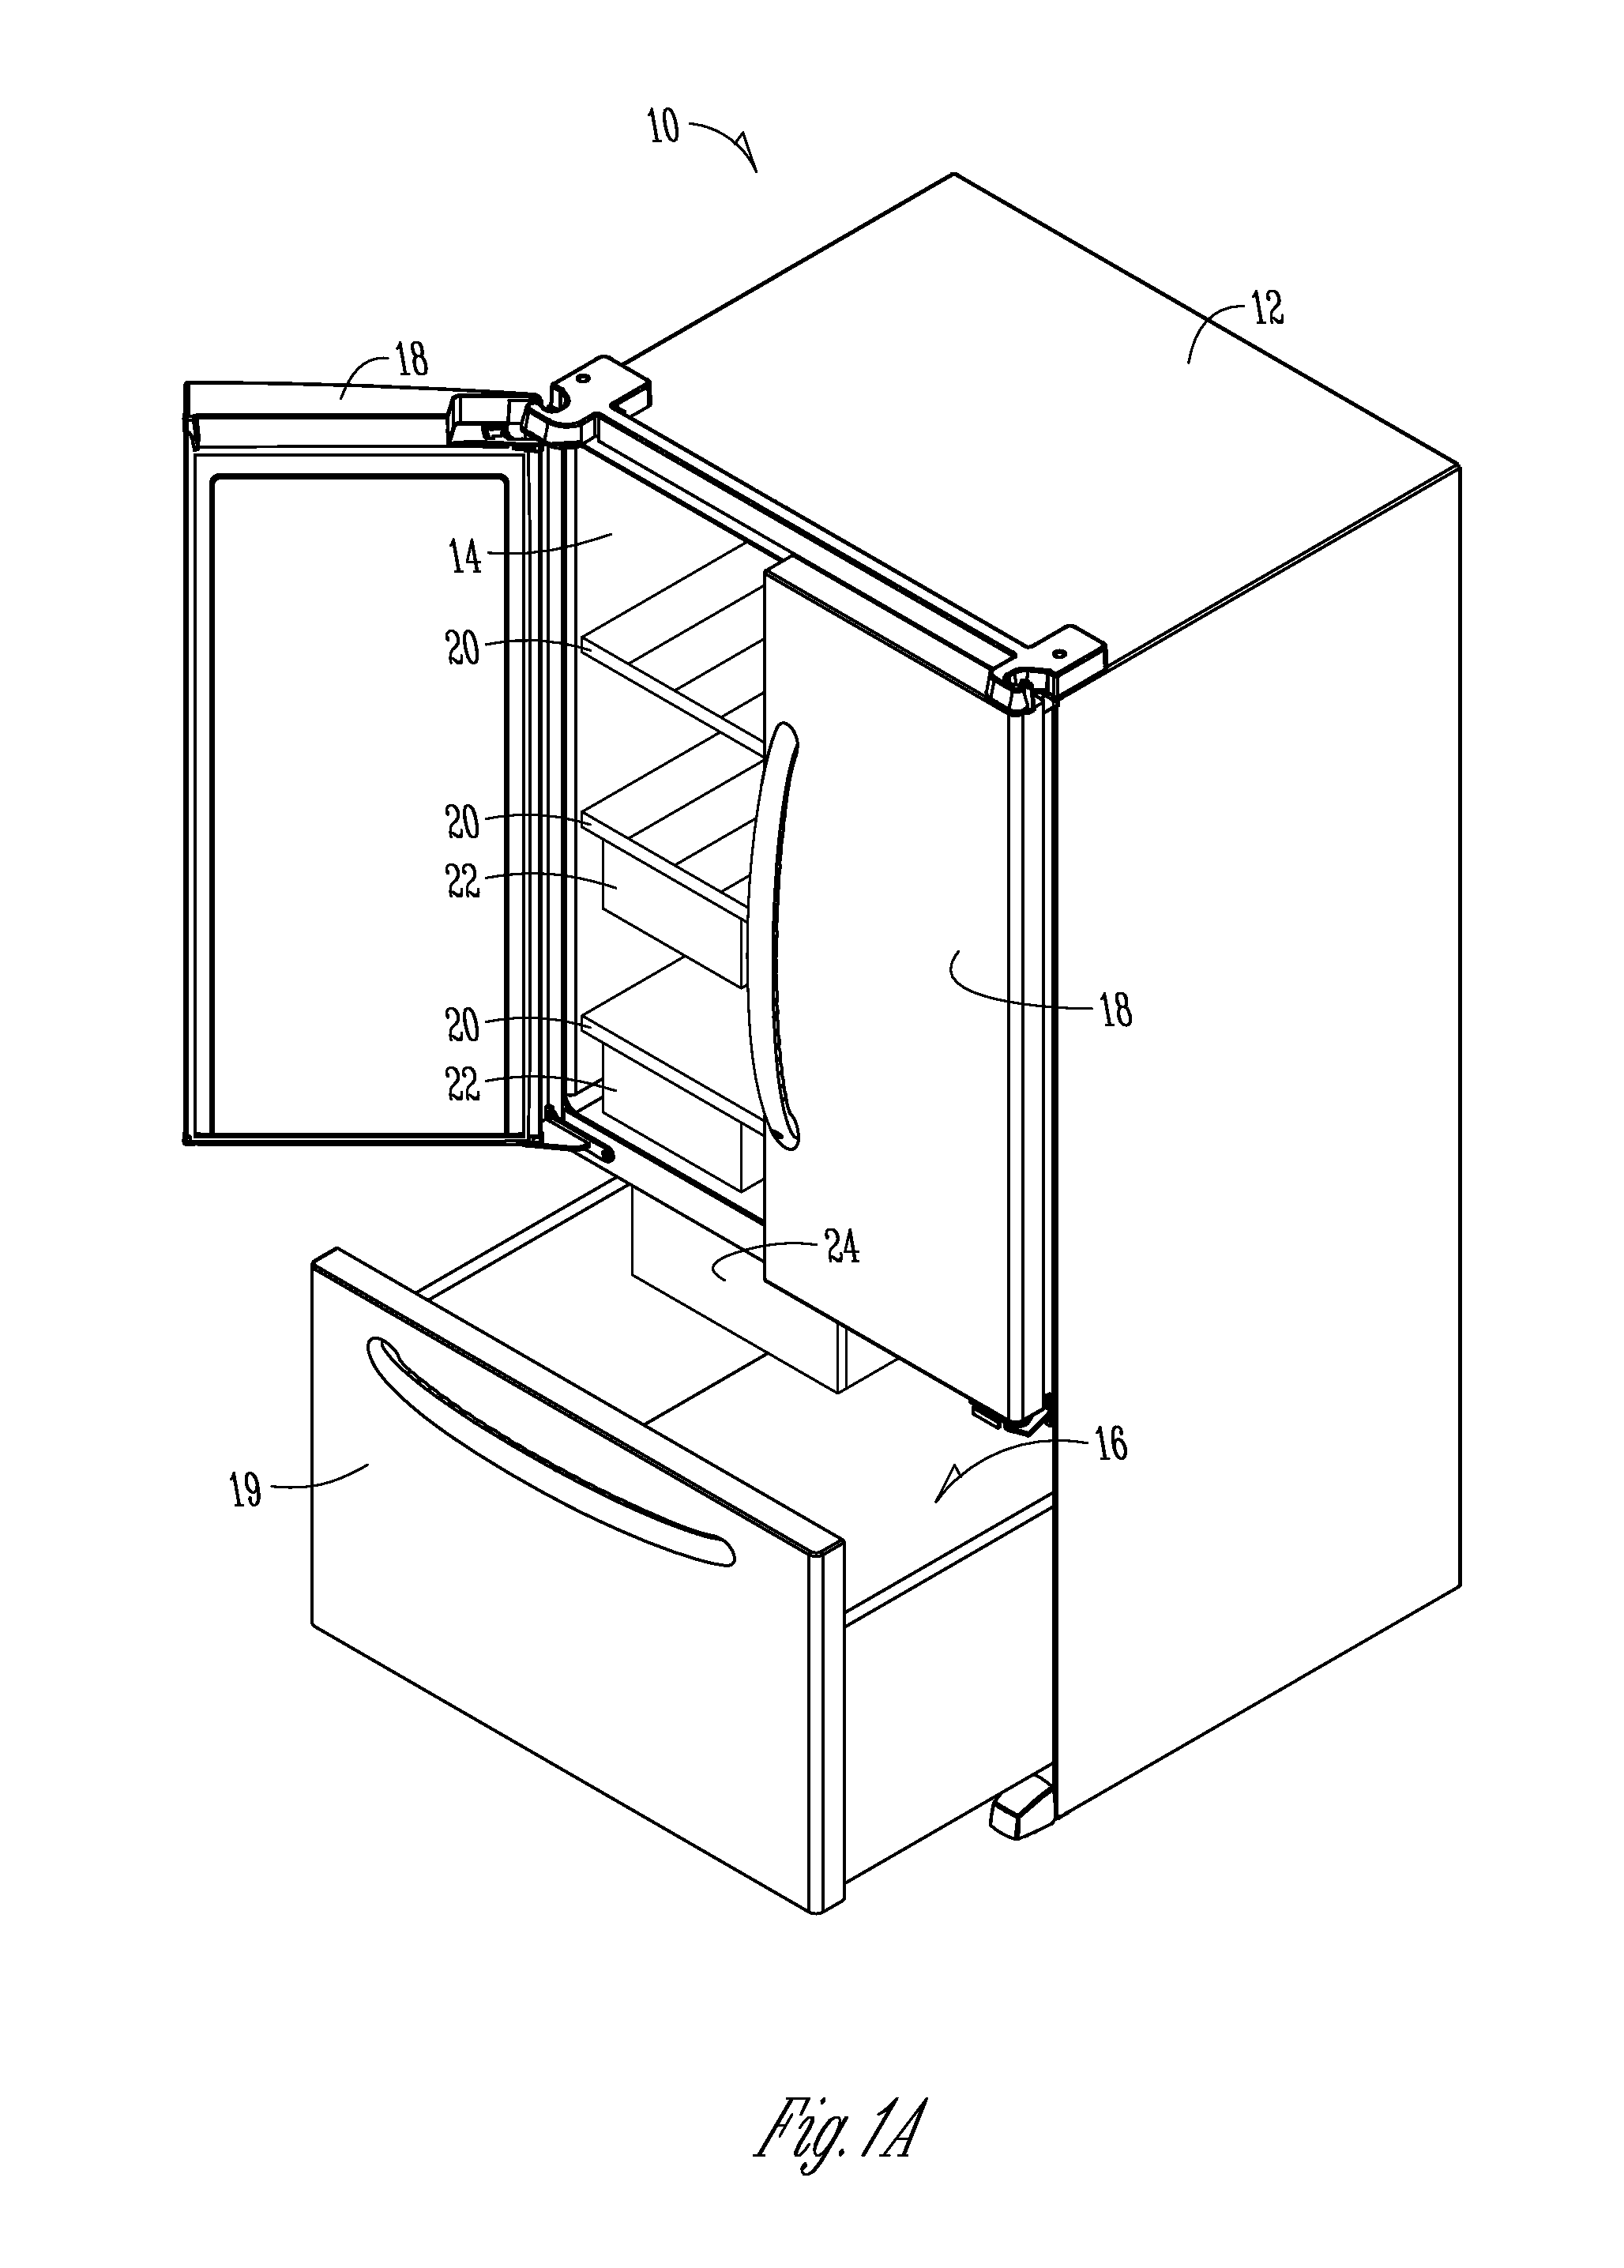 Defrost chamber within freezer compartment